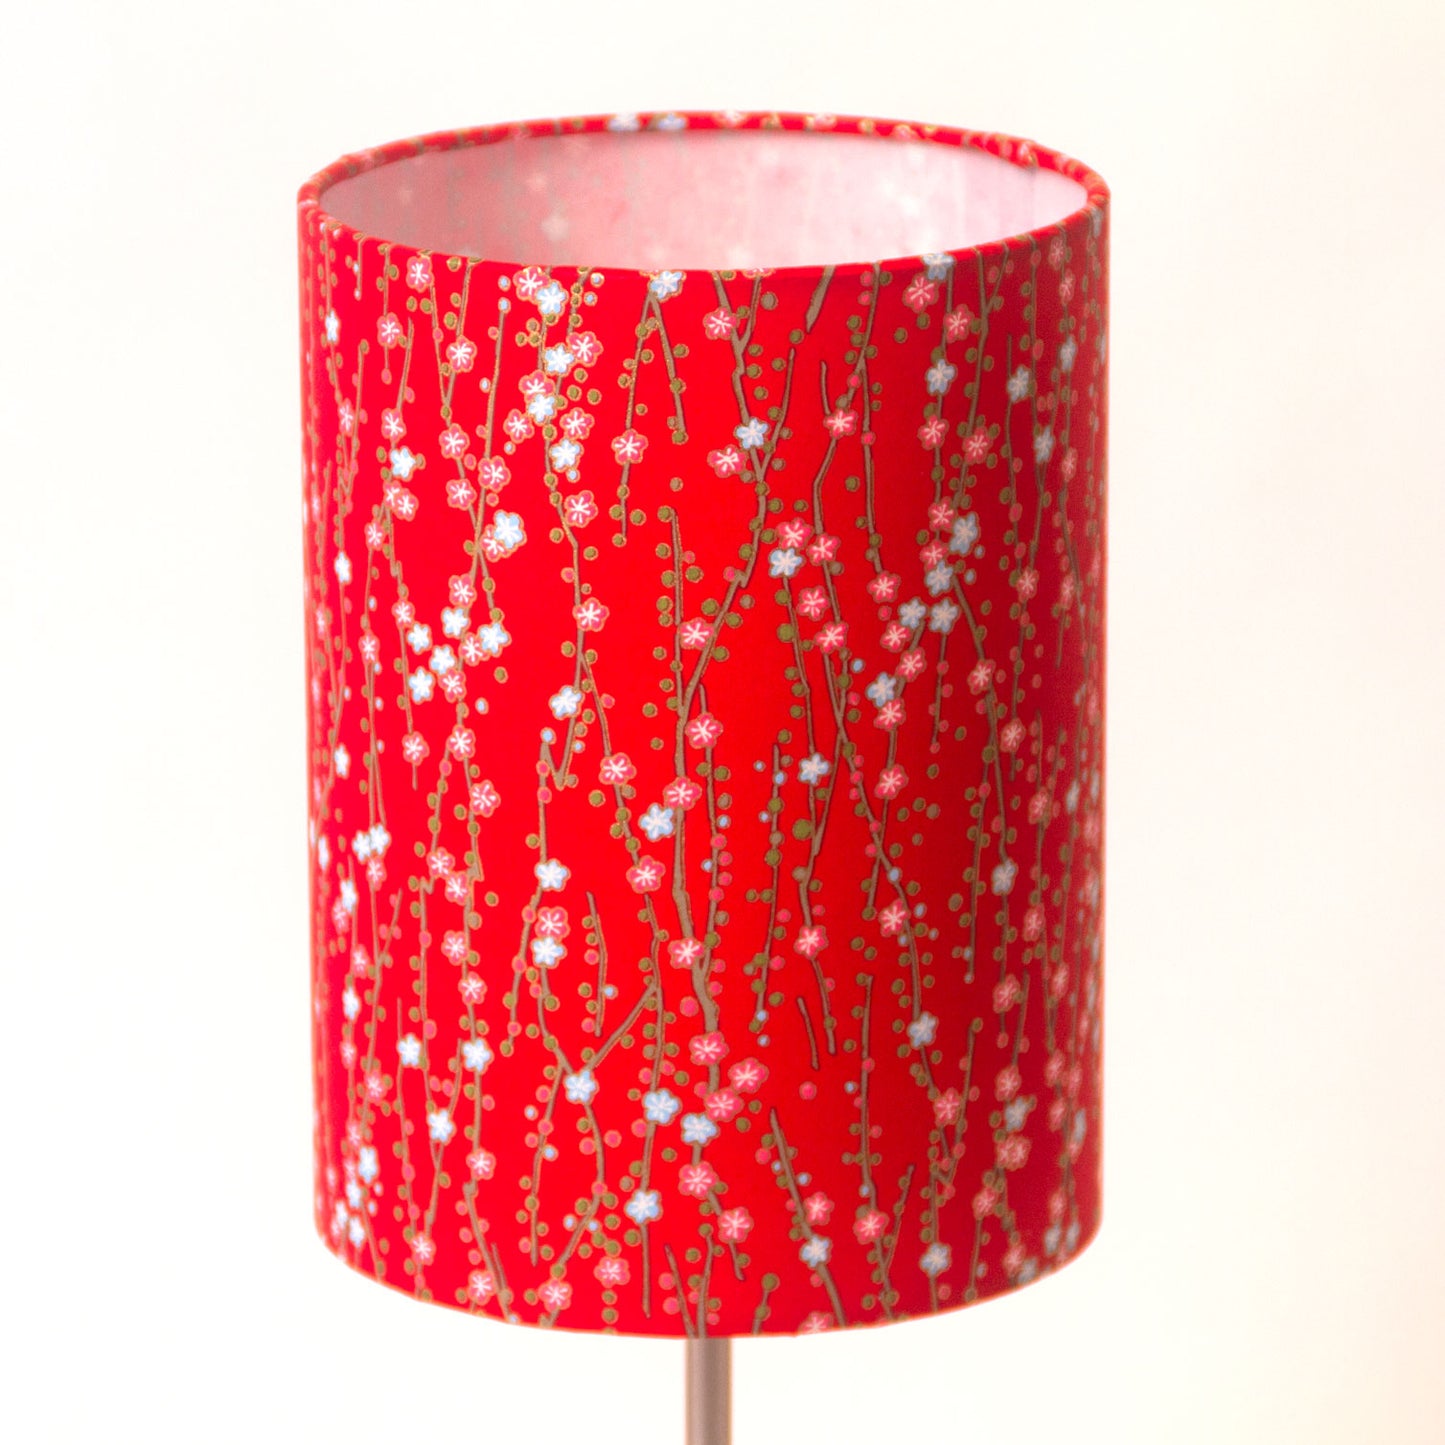 Square Lamp Shade - W01 ~ Red Daisies, 40cm(w) x 40cm(h) x 40cm(d)